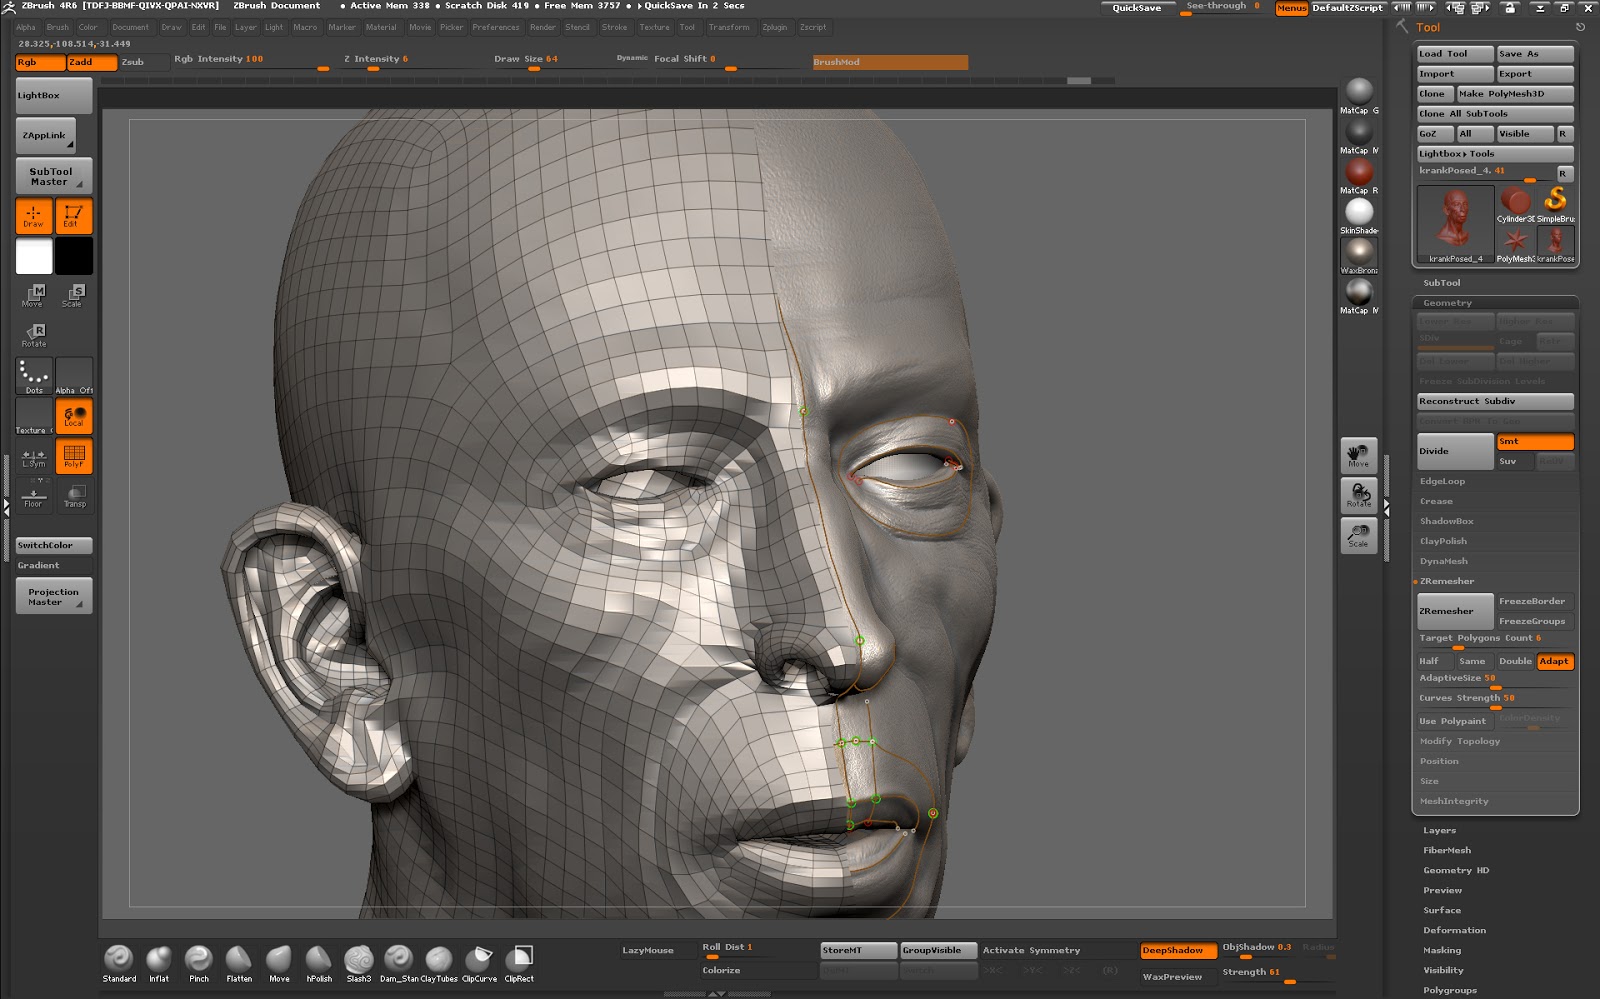 Learn zbrush or mudbox sony vegas pro 9.0 free download